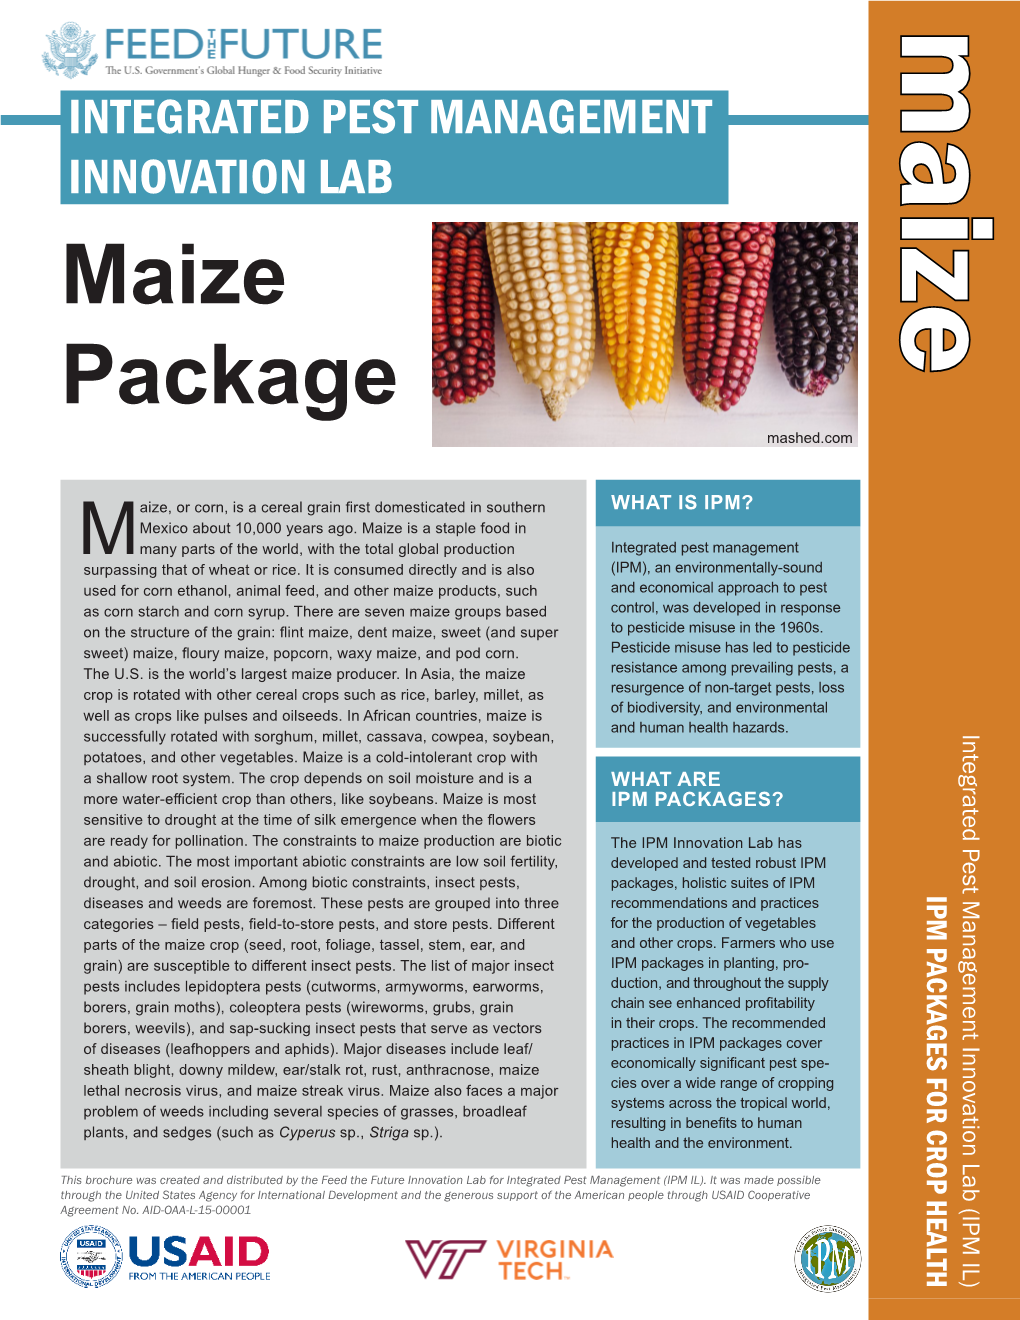 Maize Package Mashed.Com